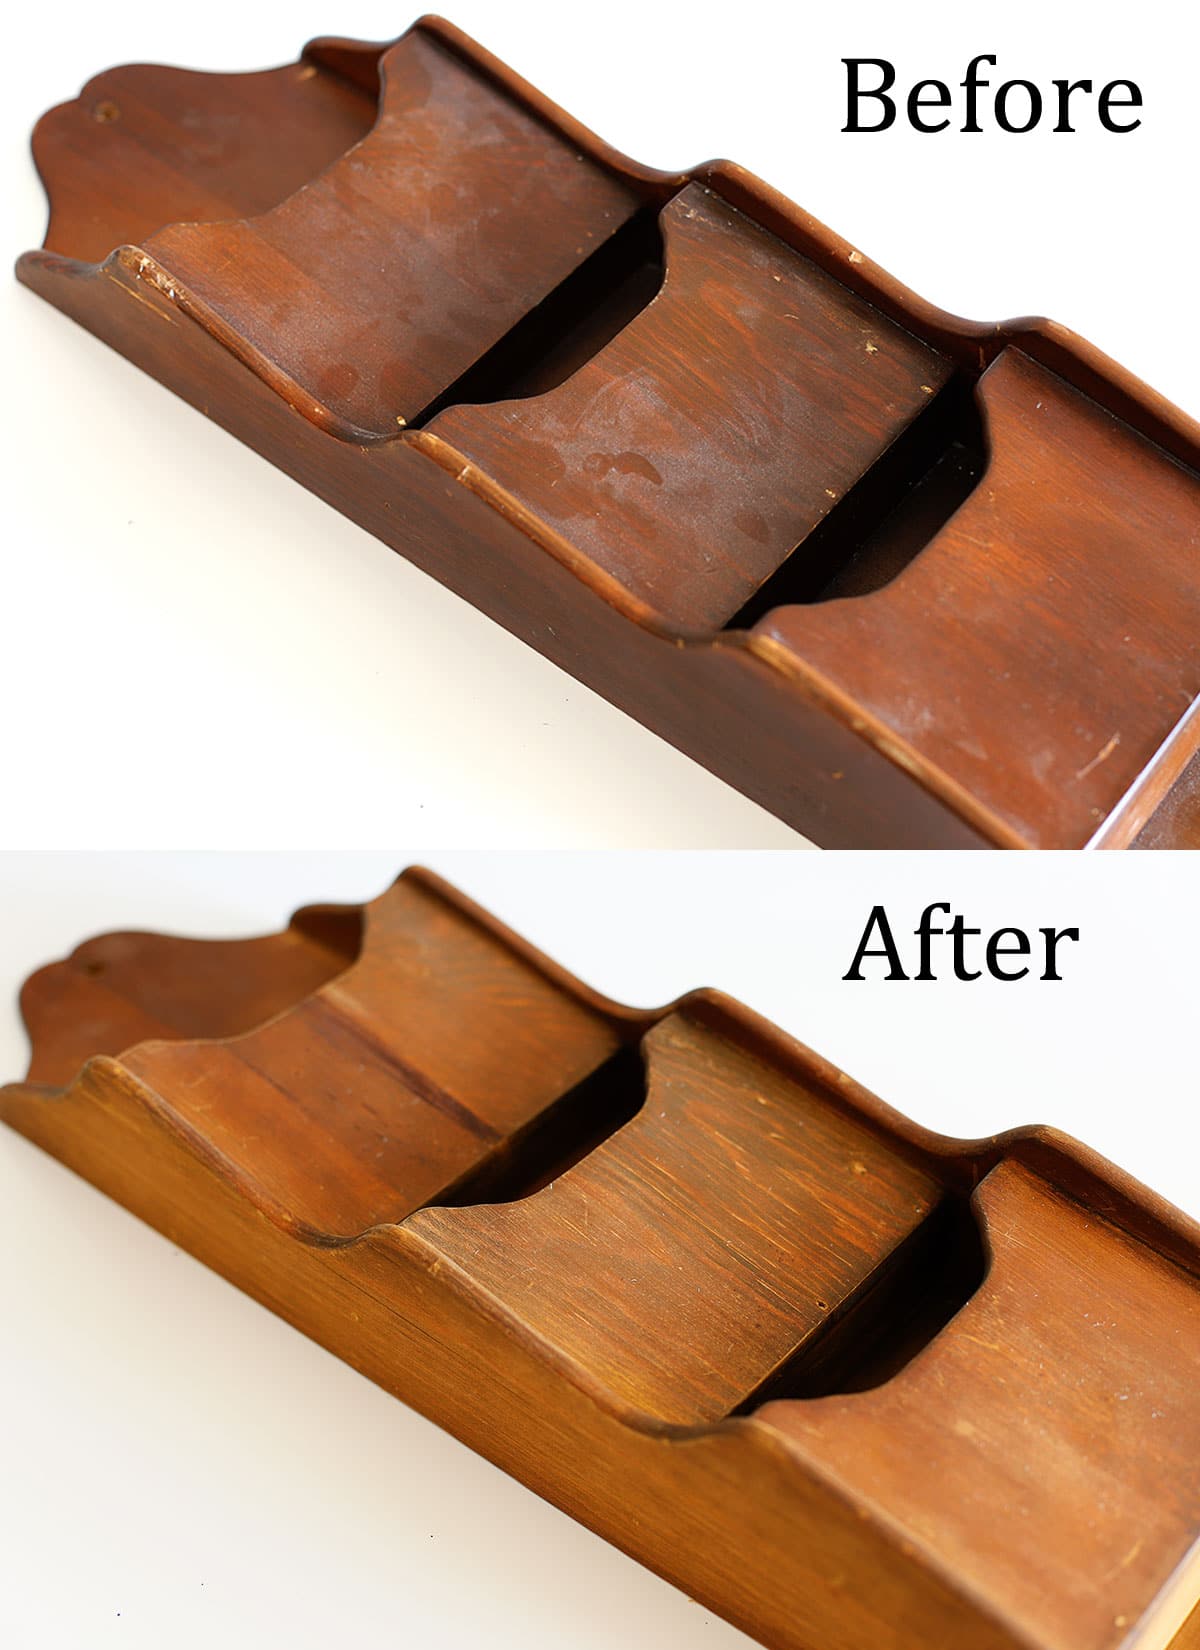 The difference between prior to using oven cleaner to strip wood and after.